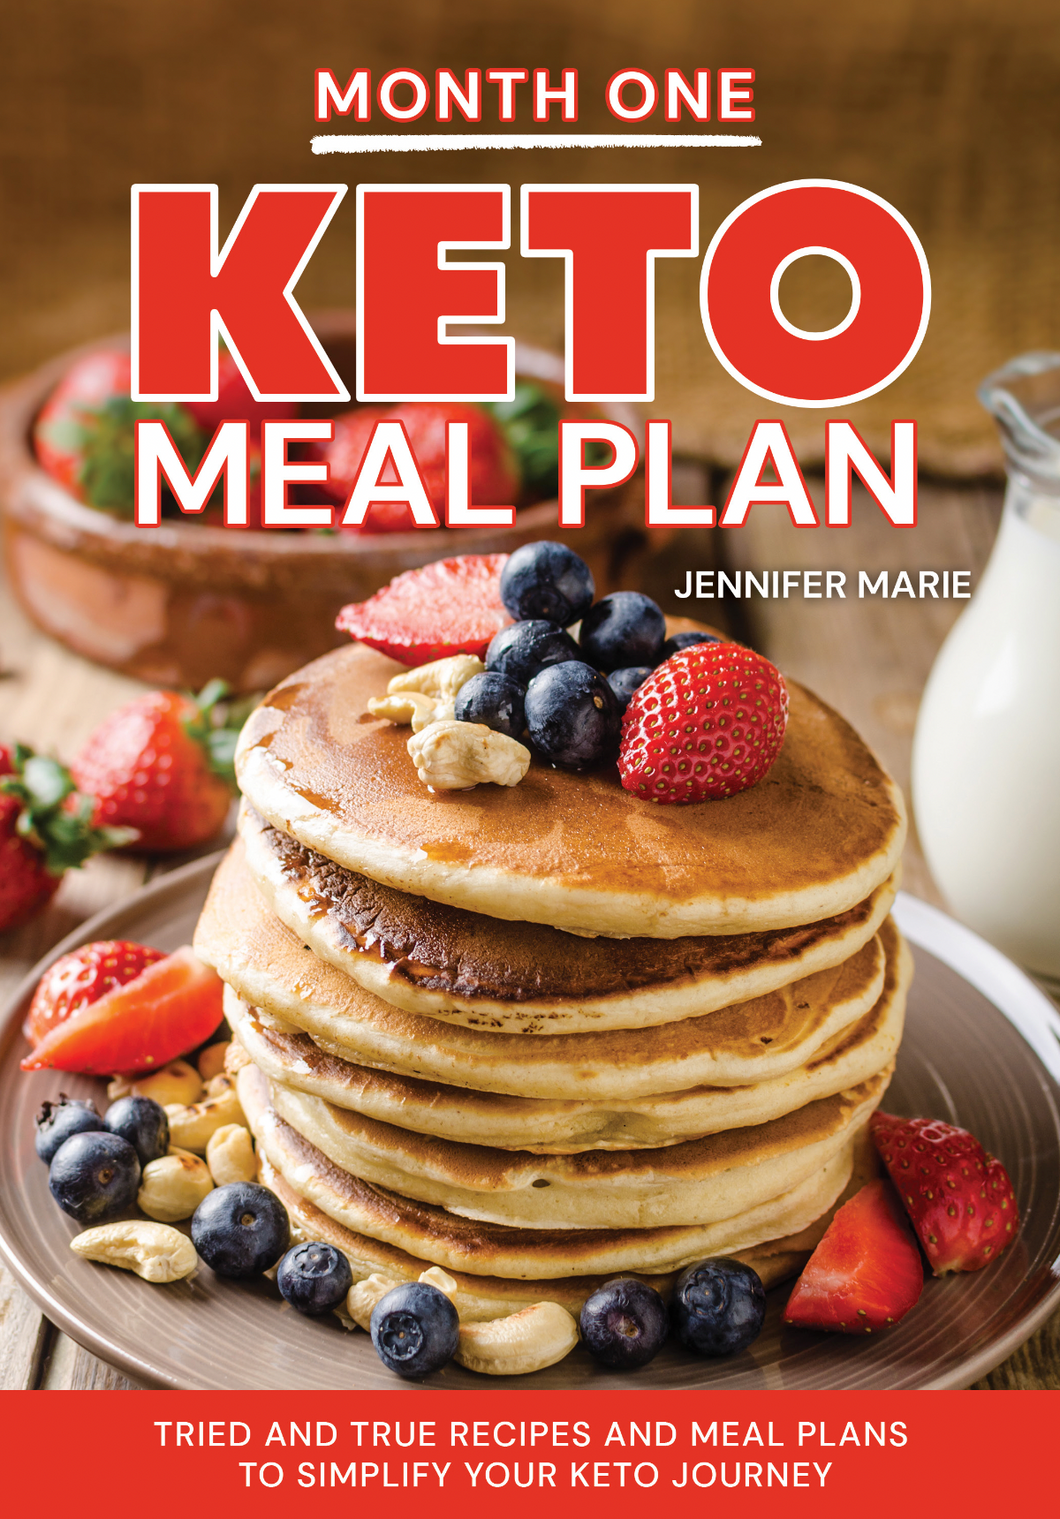 One Month Keto Meal Plan with Grocery List (Volume 1)